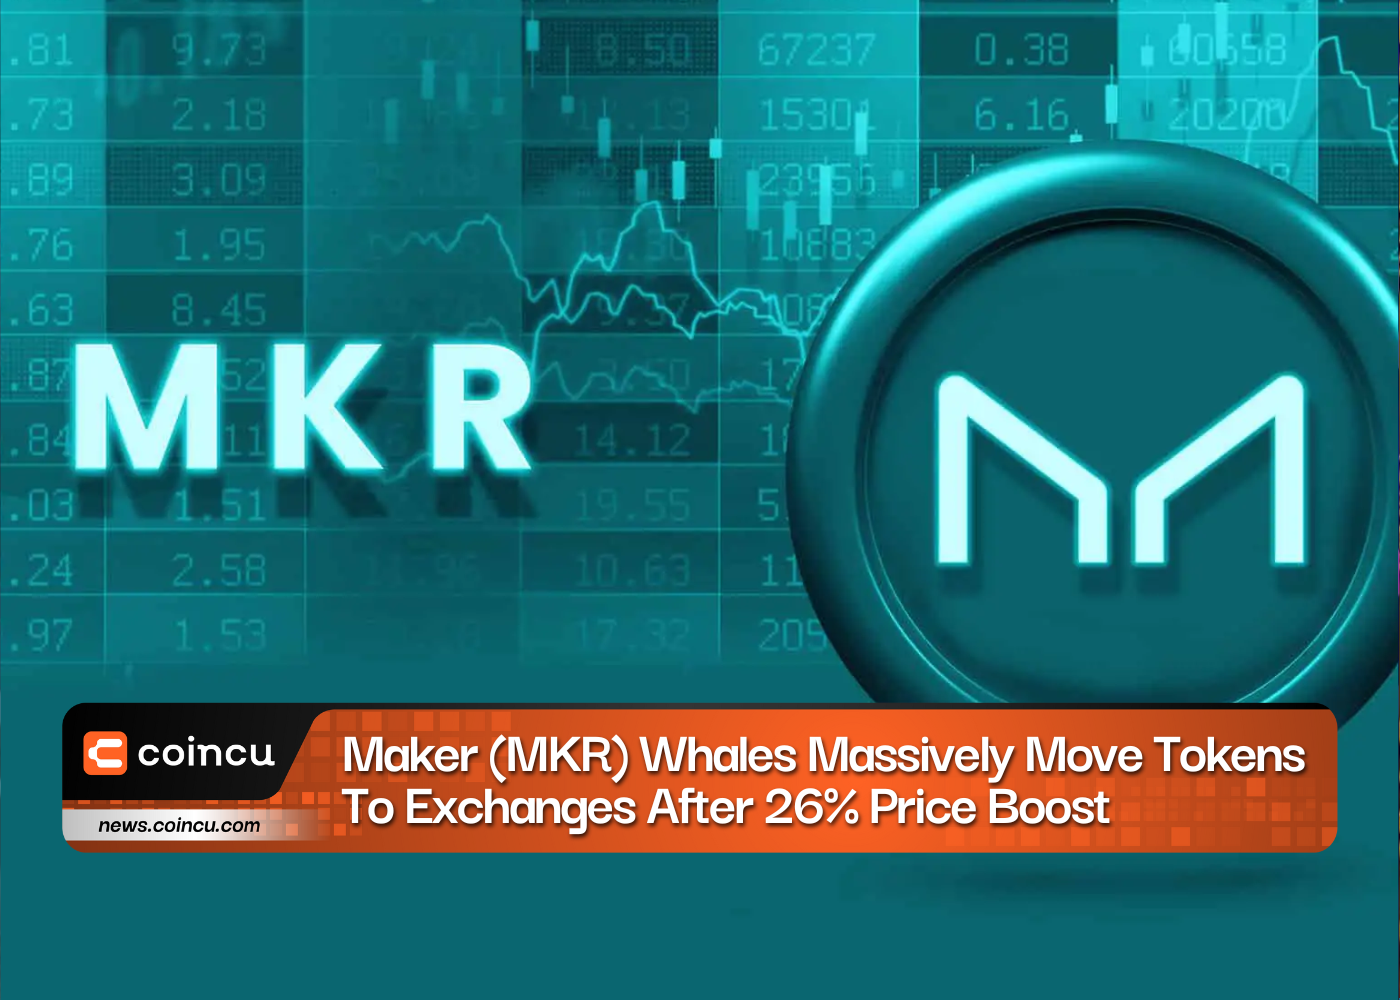 Maker (MKR) Whales Massively Move Tokens To Exchanges After 26% Price Boost